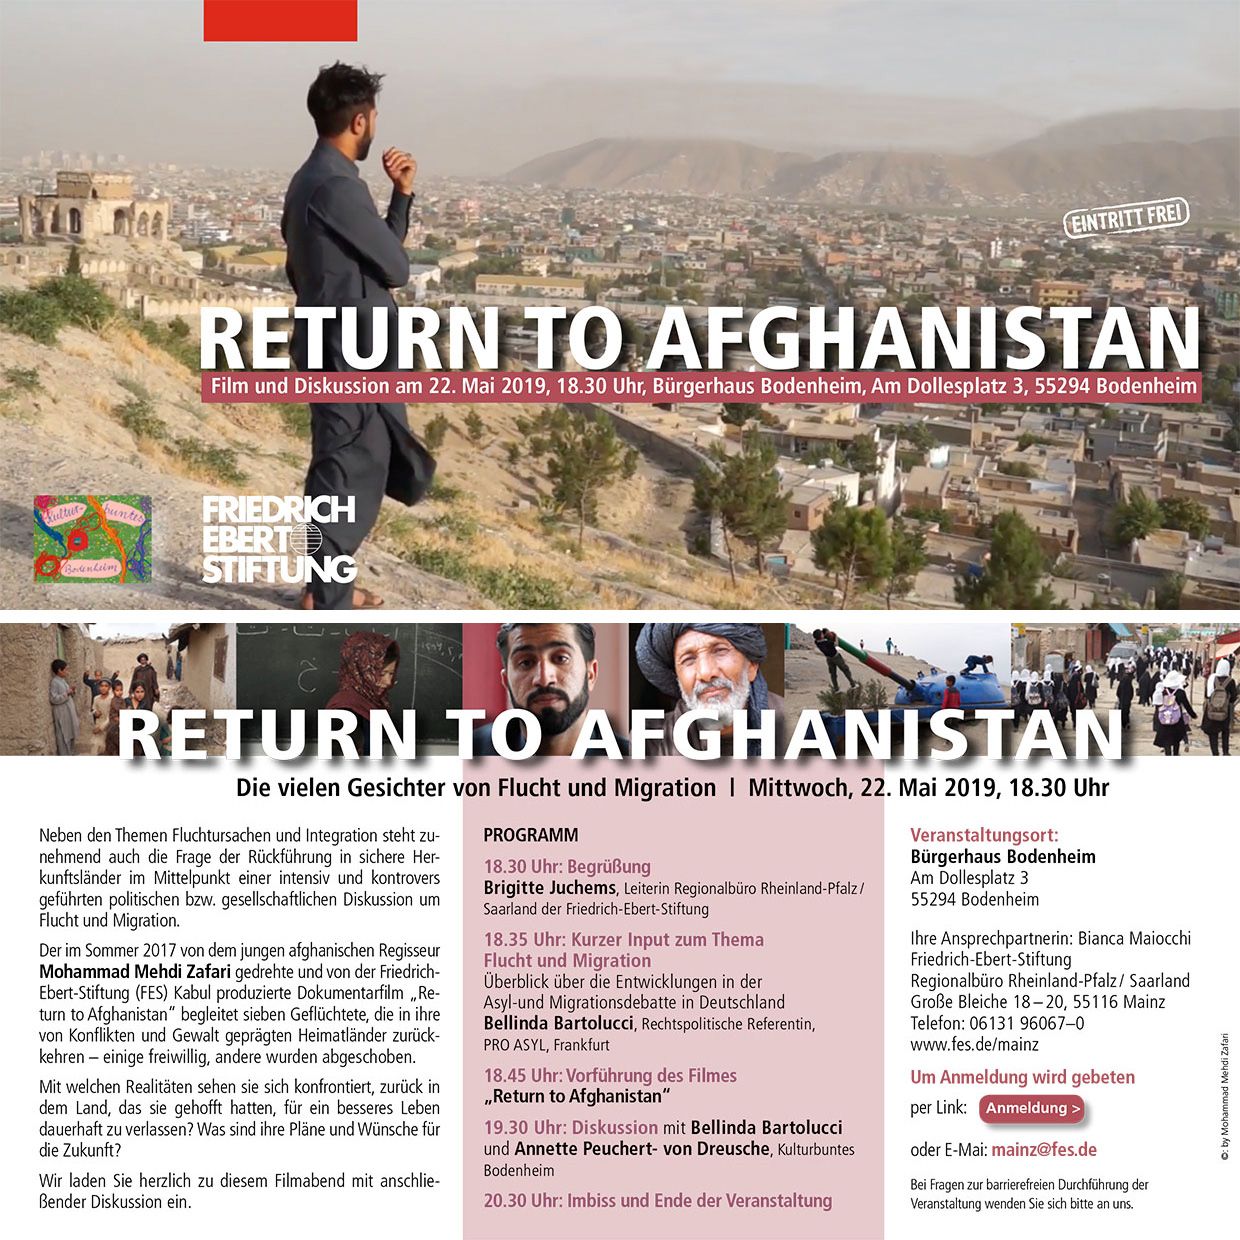 Return to Afghanistan: Filmabend mit Podiumsdiskussion